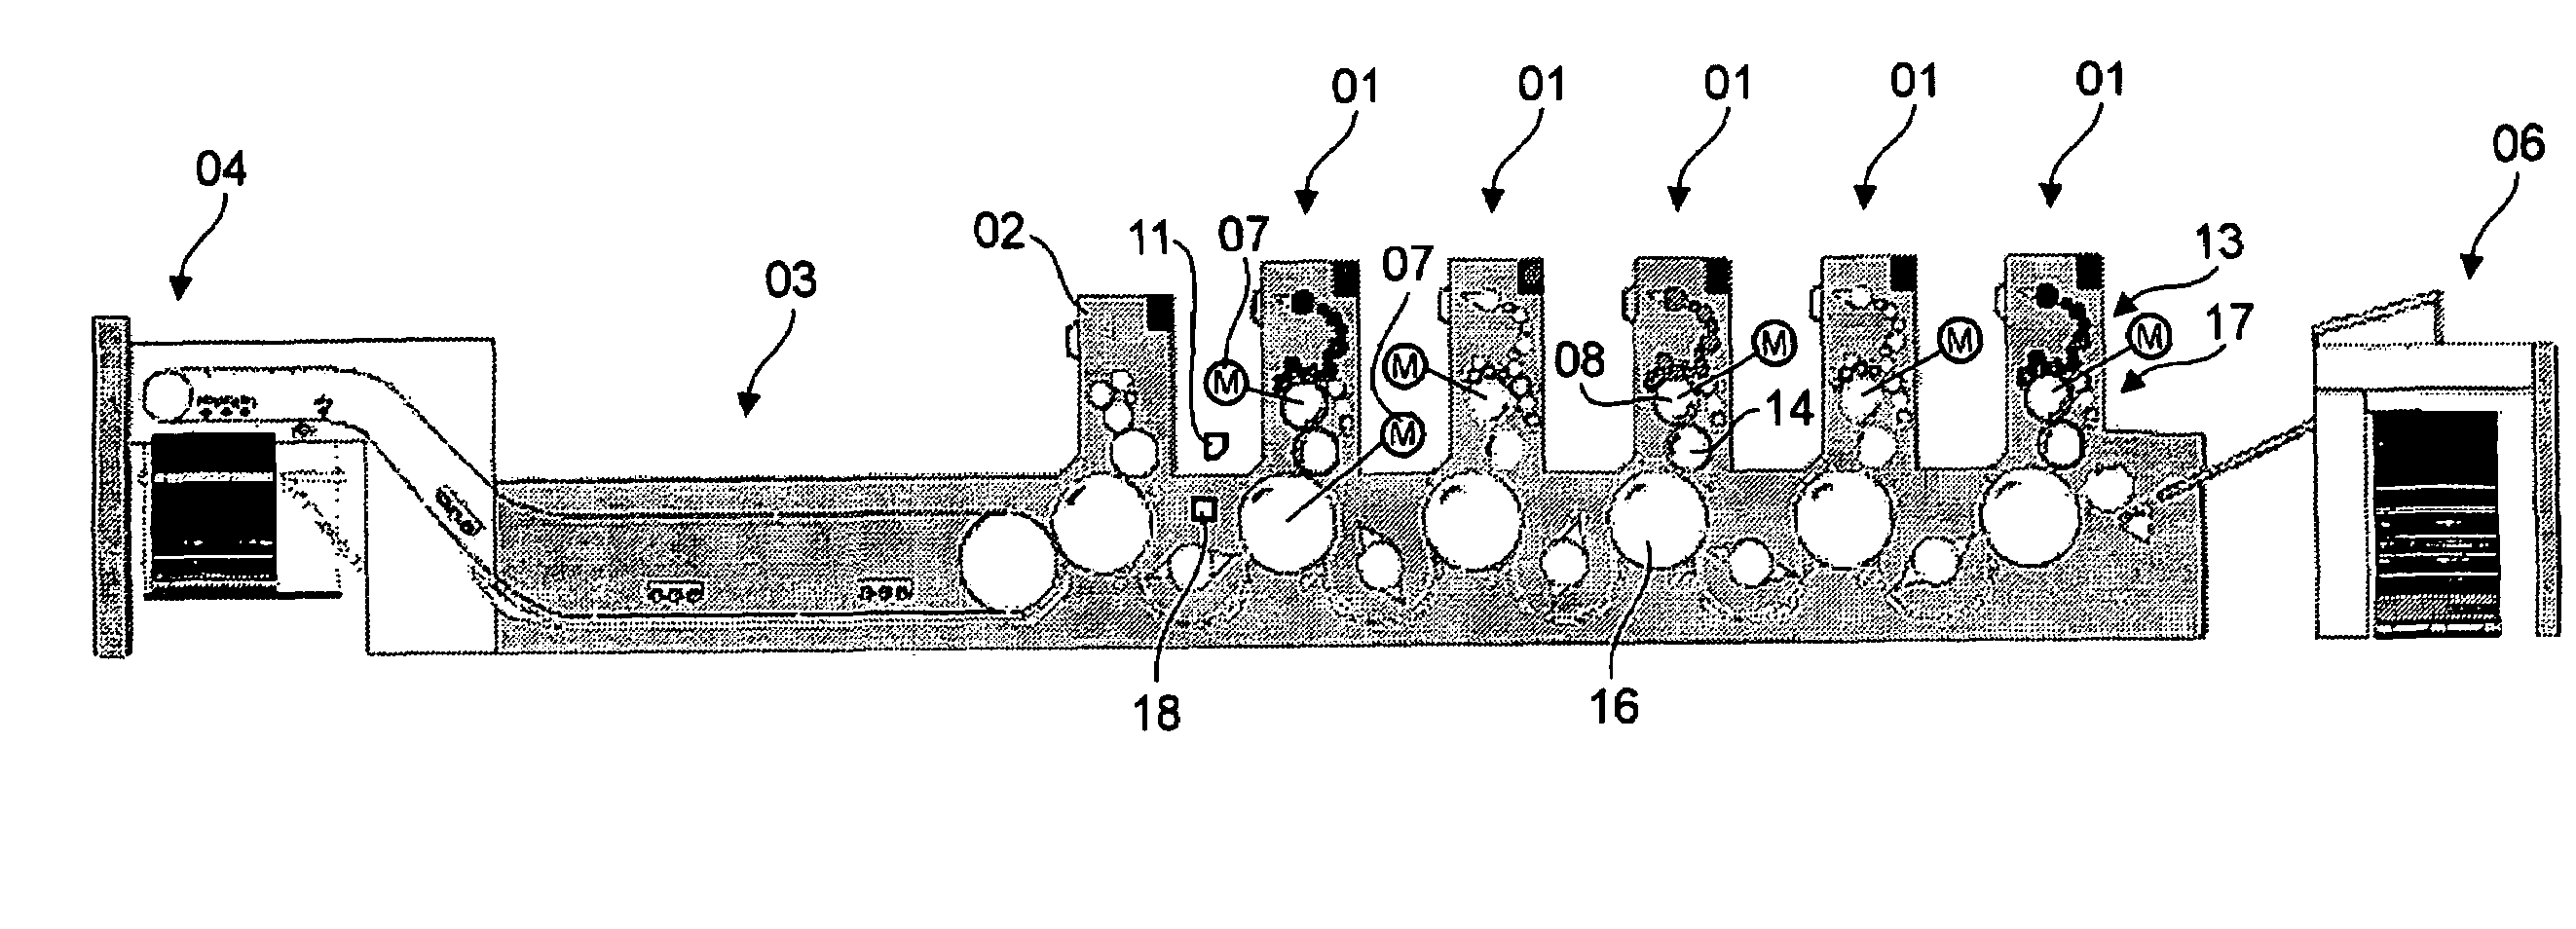 Printing machines having at least one machine element that can be adjusted by a setting element